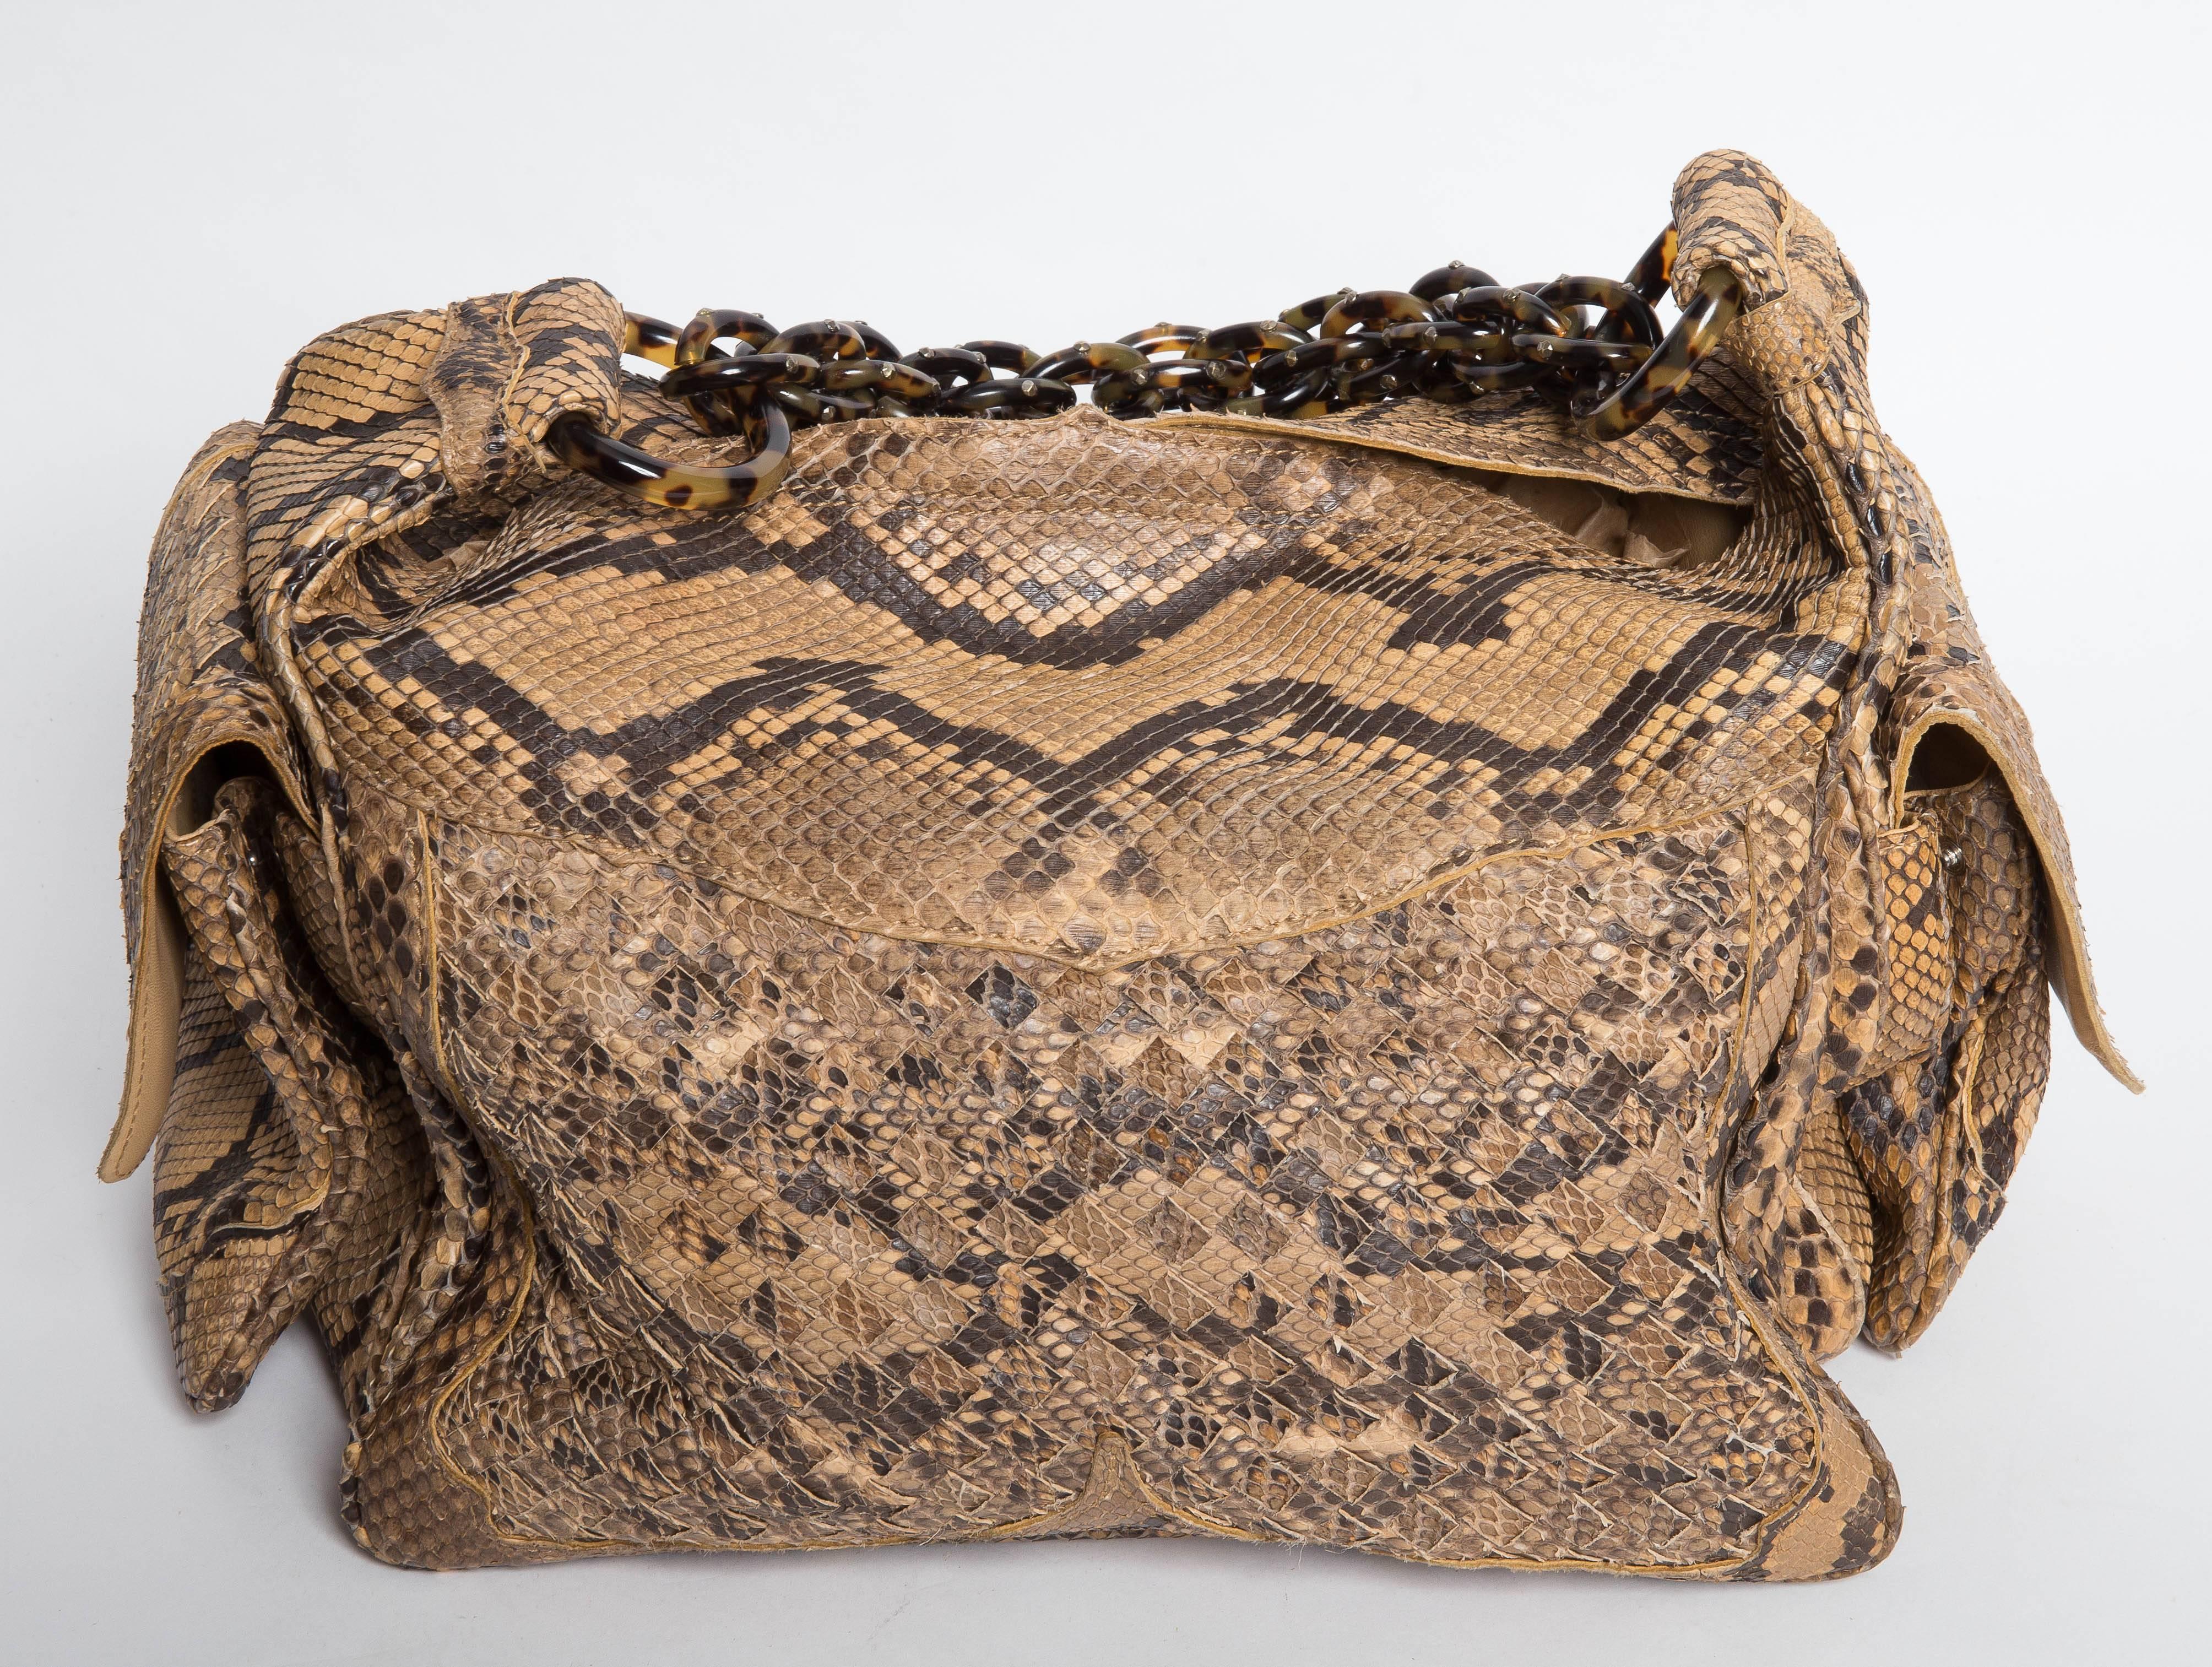 Stunning Bottega Veneta Ltd Edition Python Shoulder Bag with Studded Tortoise Shell Chain. Features 2 Side Pouches and an Interior Zipped Pocket. Lined in Suede, This Bag is Pure Luxe.